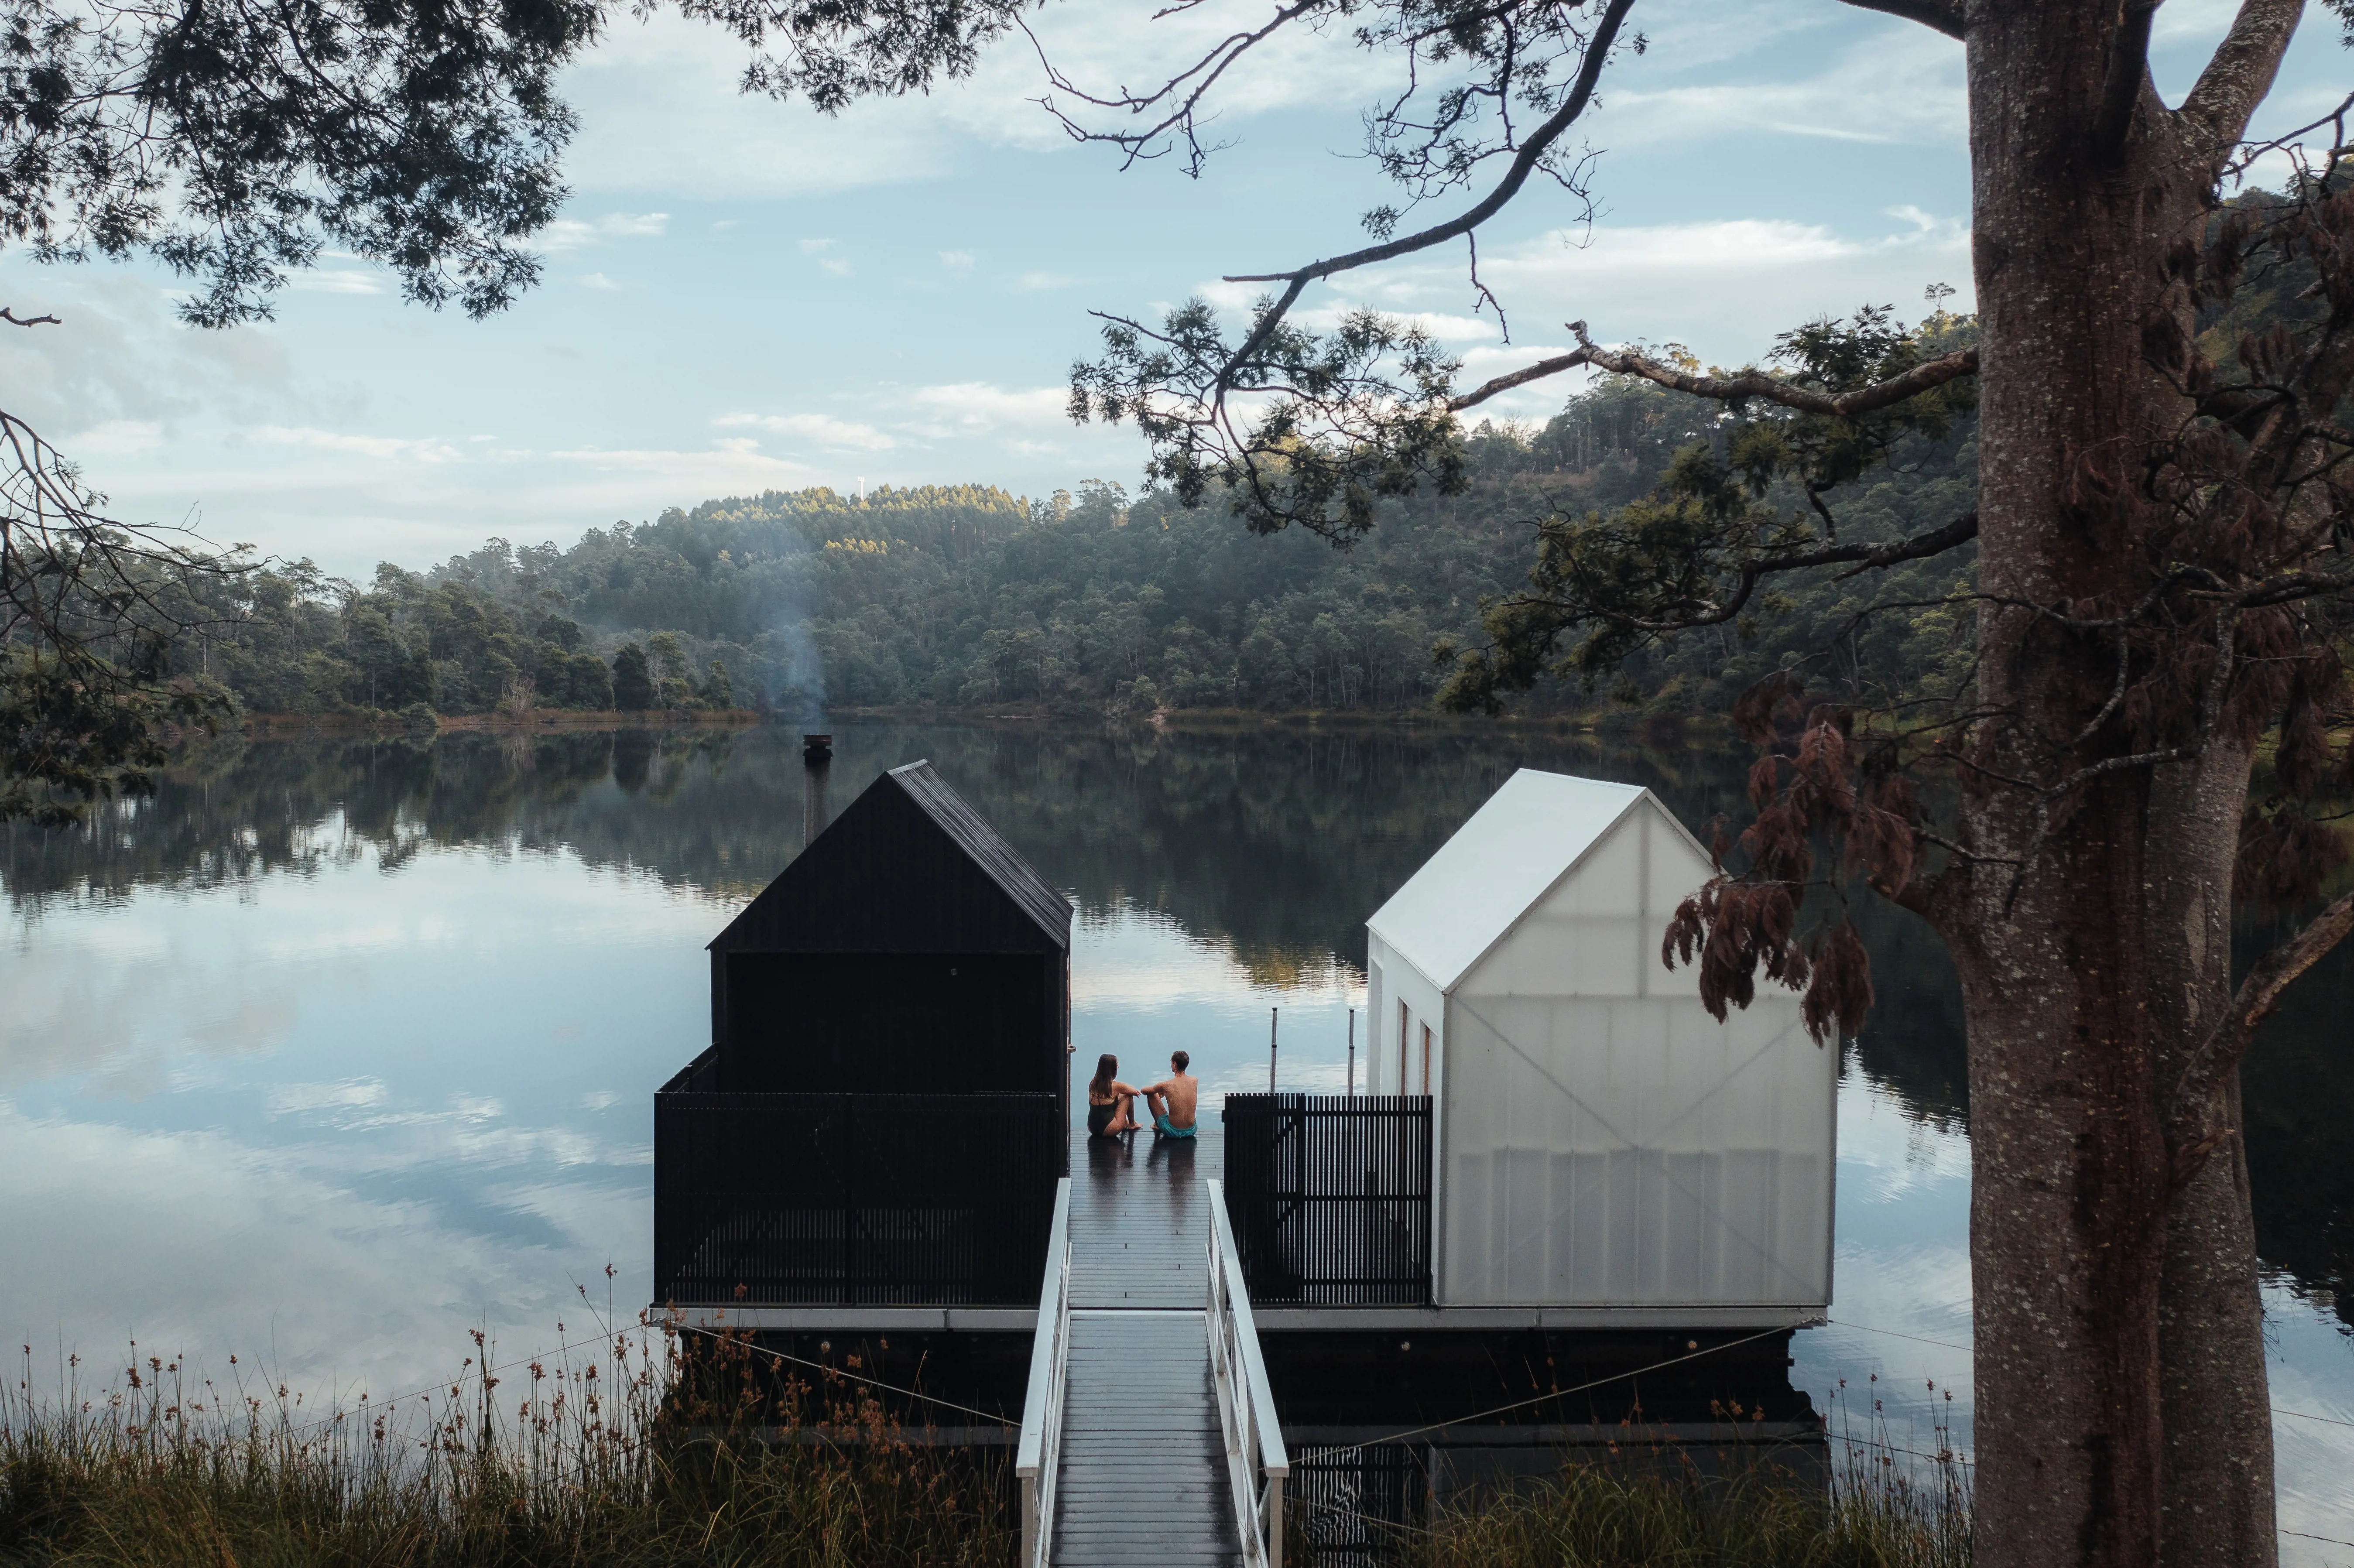 Bathers sitting on jetty between black and white sauna huts, overlooking lake.